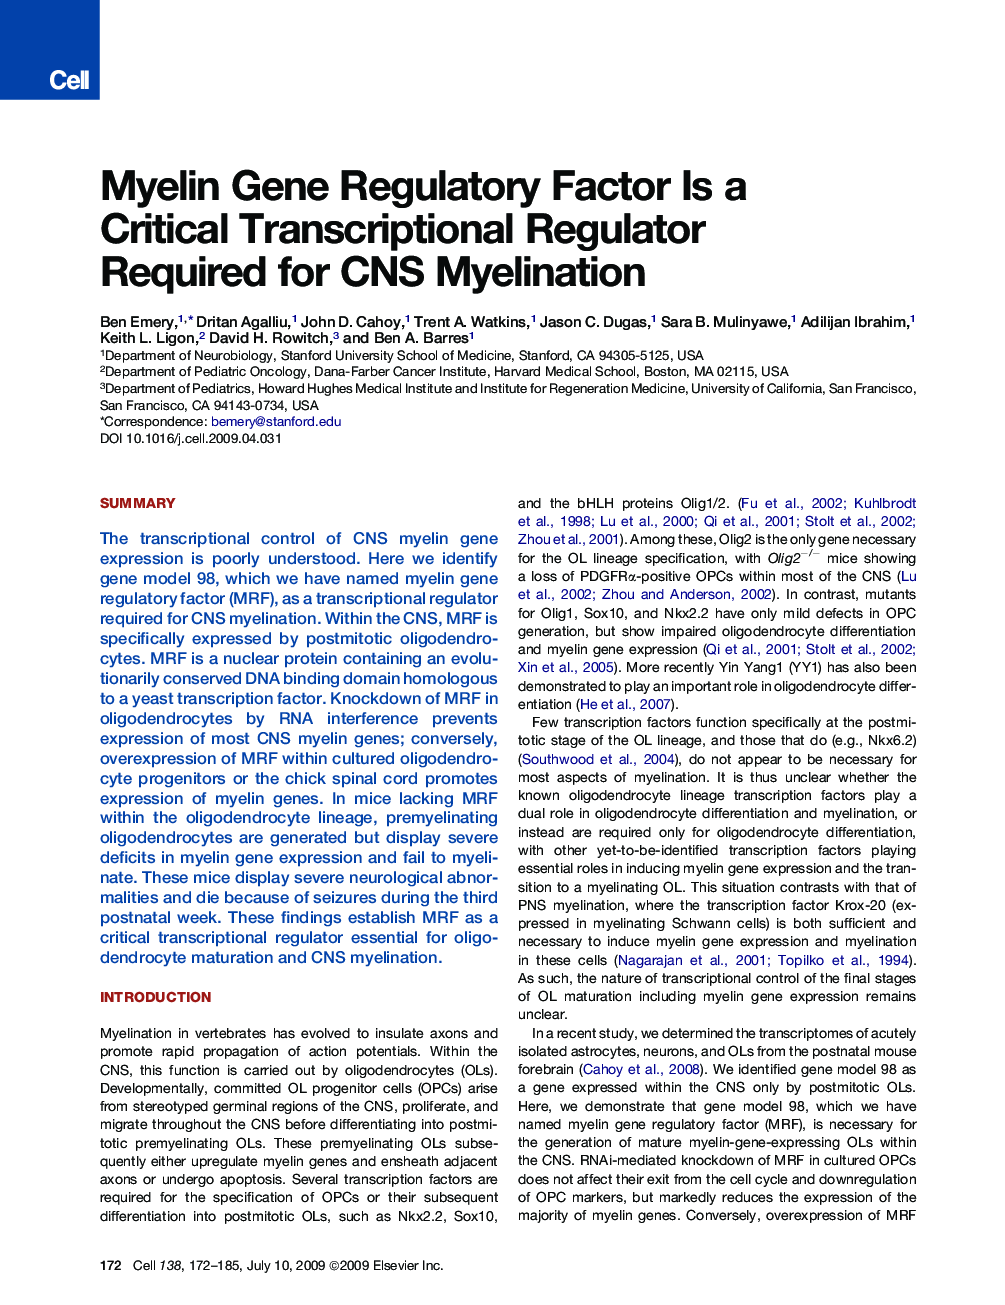 Myelin Gene Regulatory Factor Is a Critical Transcriptional Regulator Required for CNS Myelination